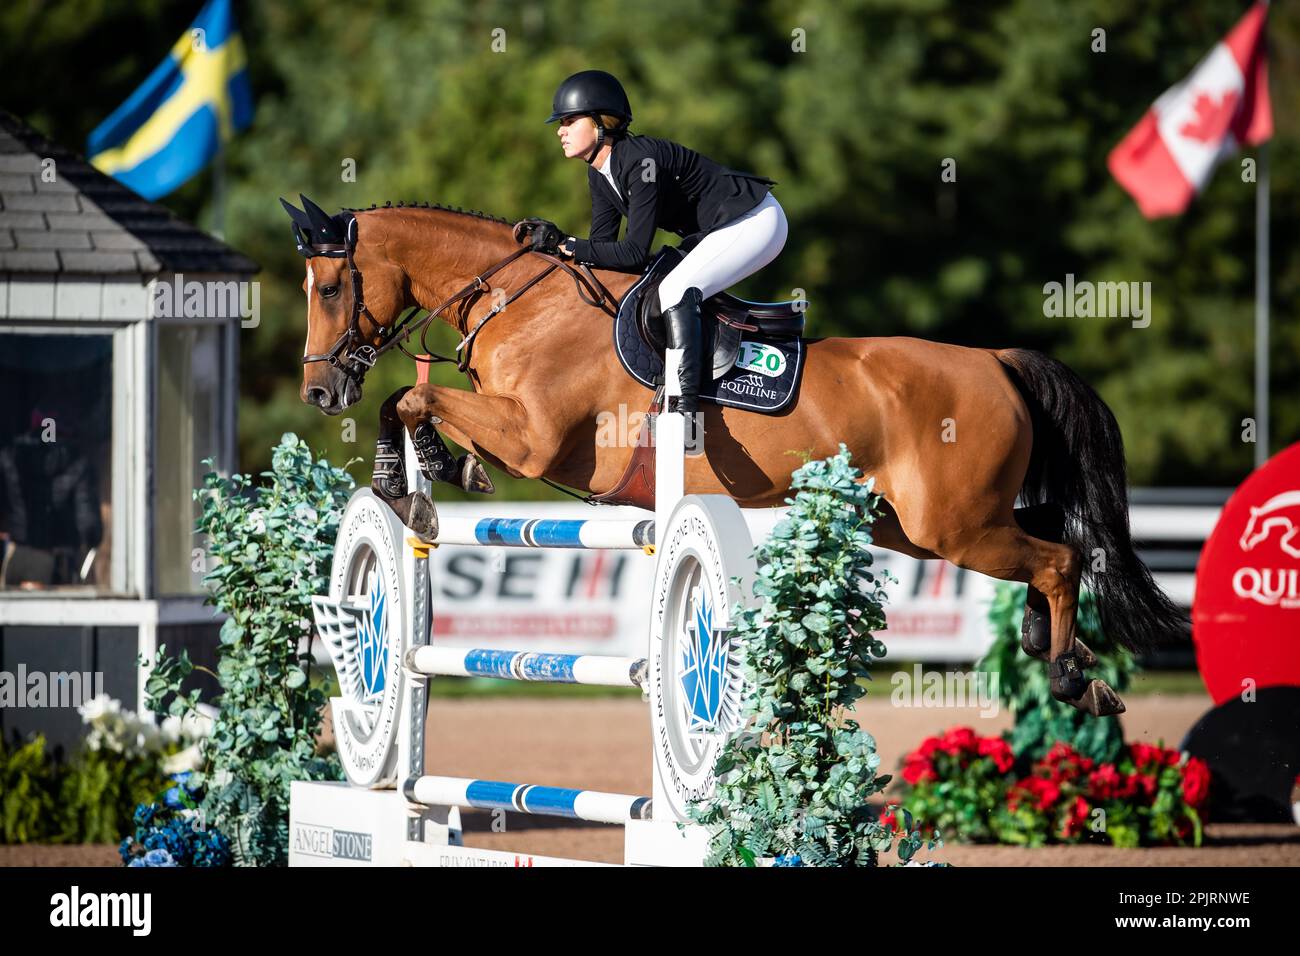 Chandler Meadows of the United States compete in un evento Major League Show Jumping nel 2021 al Caledon Equestrian Park. Foto Stock